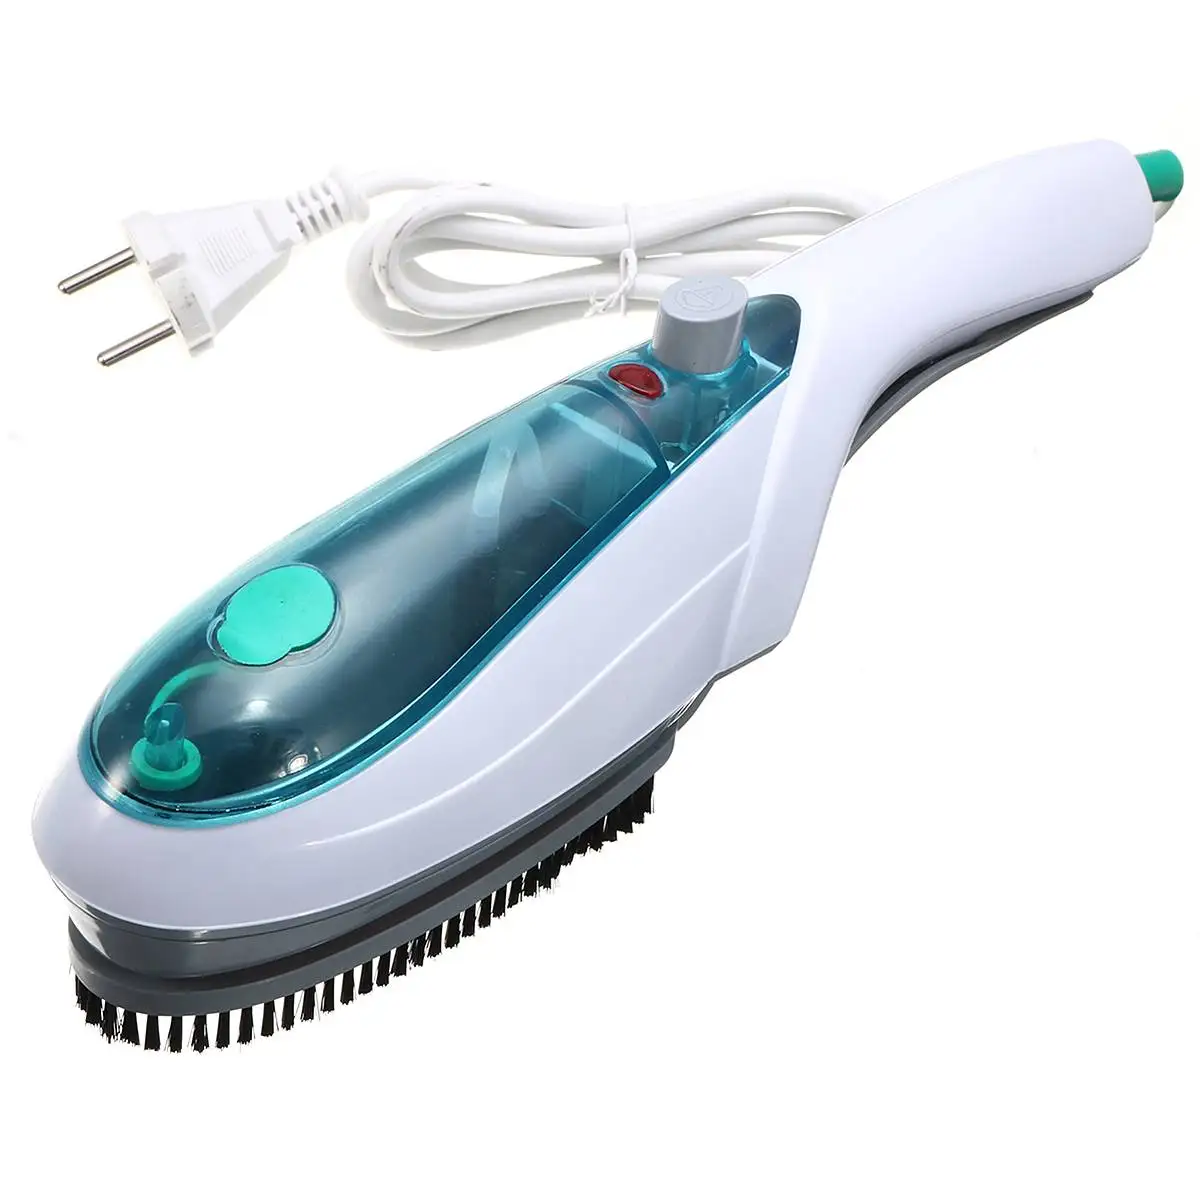 Portable Handheld Electric Iron Steam Brush Fabric Laundry Clothes Home Brush 